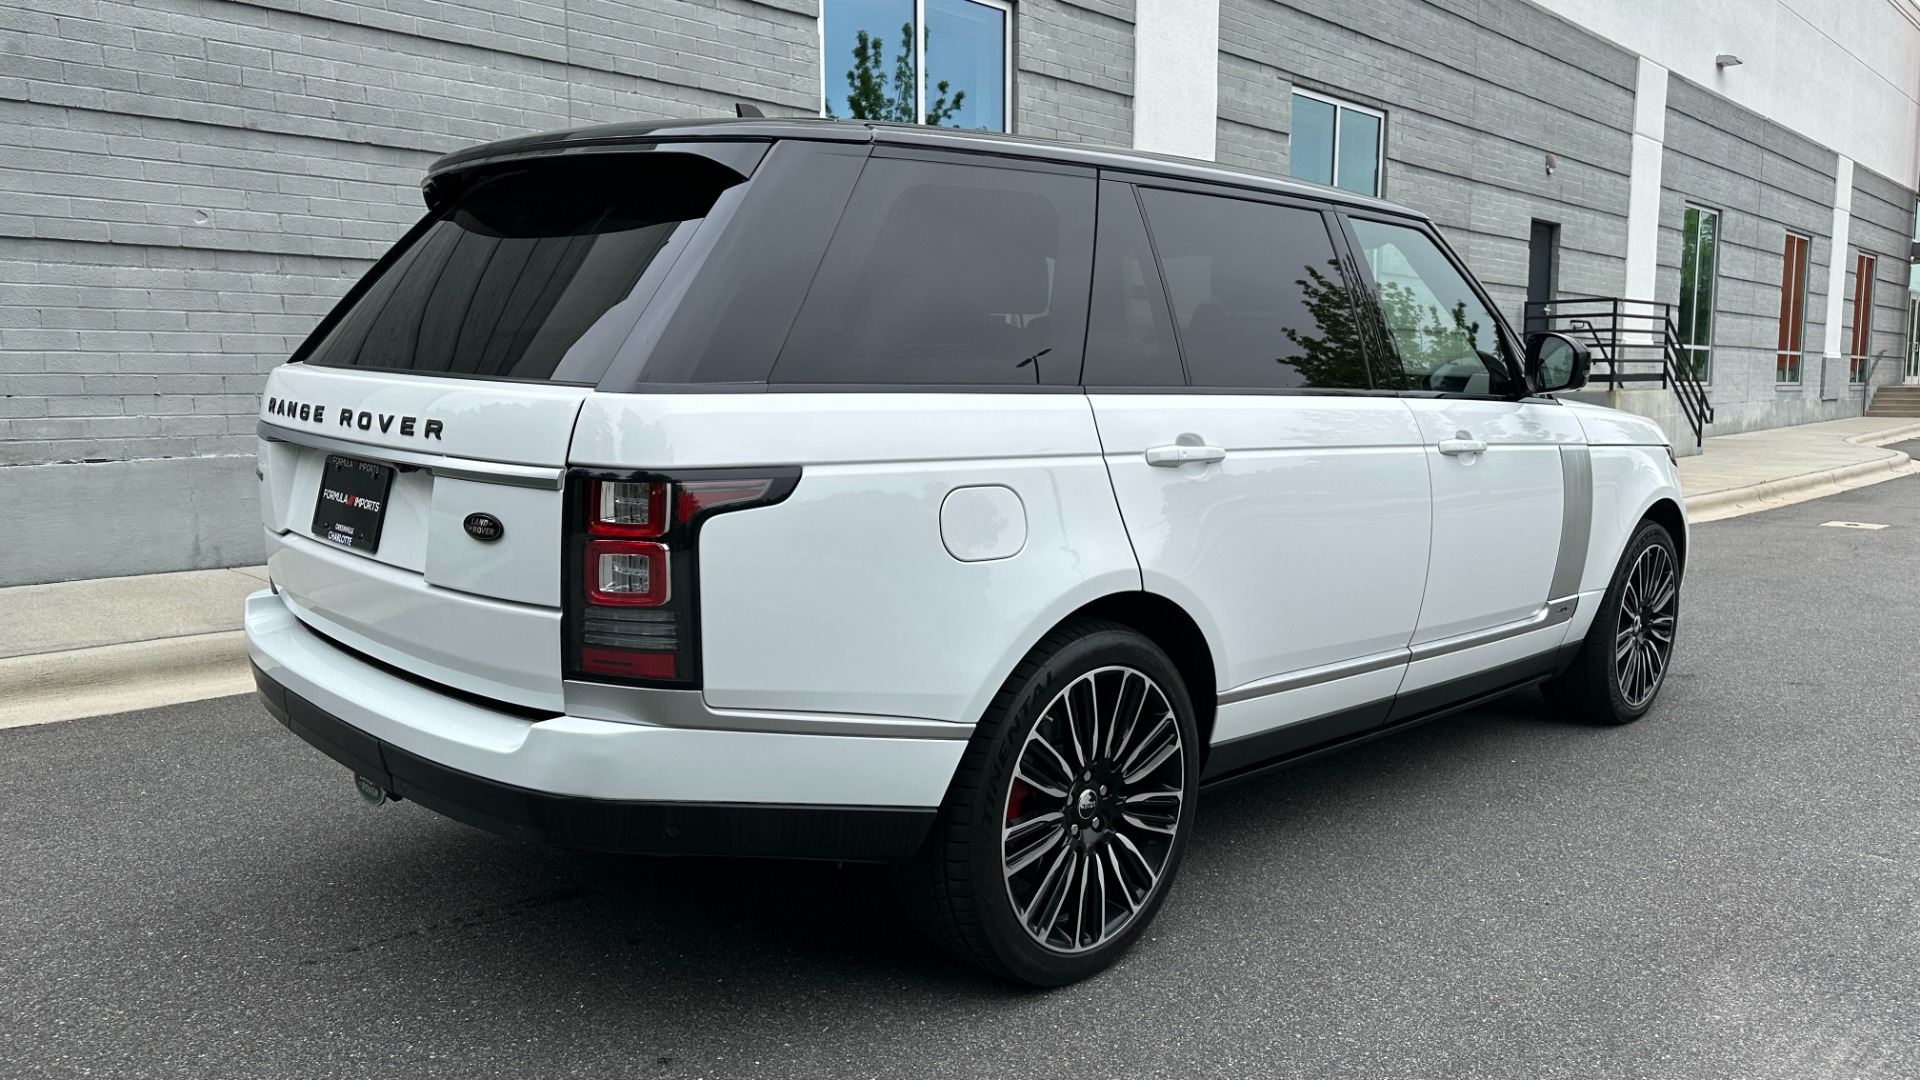 Used 2016 Land Rover Range Rover SUPERCHARGED 5.0 LWB / MERIDIAN / 22IN WHEELS / TOW PKG / CLIMATE PKG for sale $44,000 at Formula Imports in Charlotte NC 28227 7